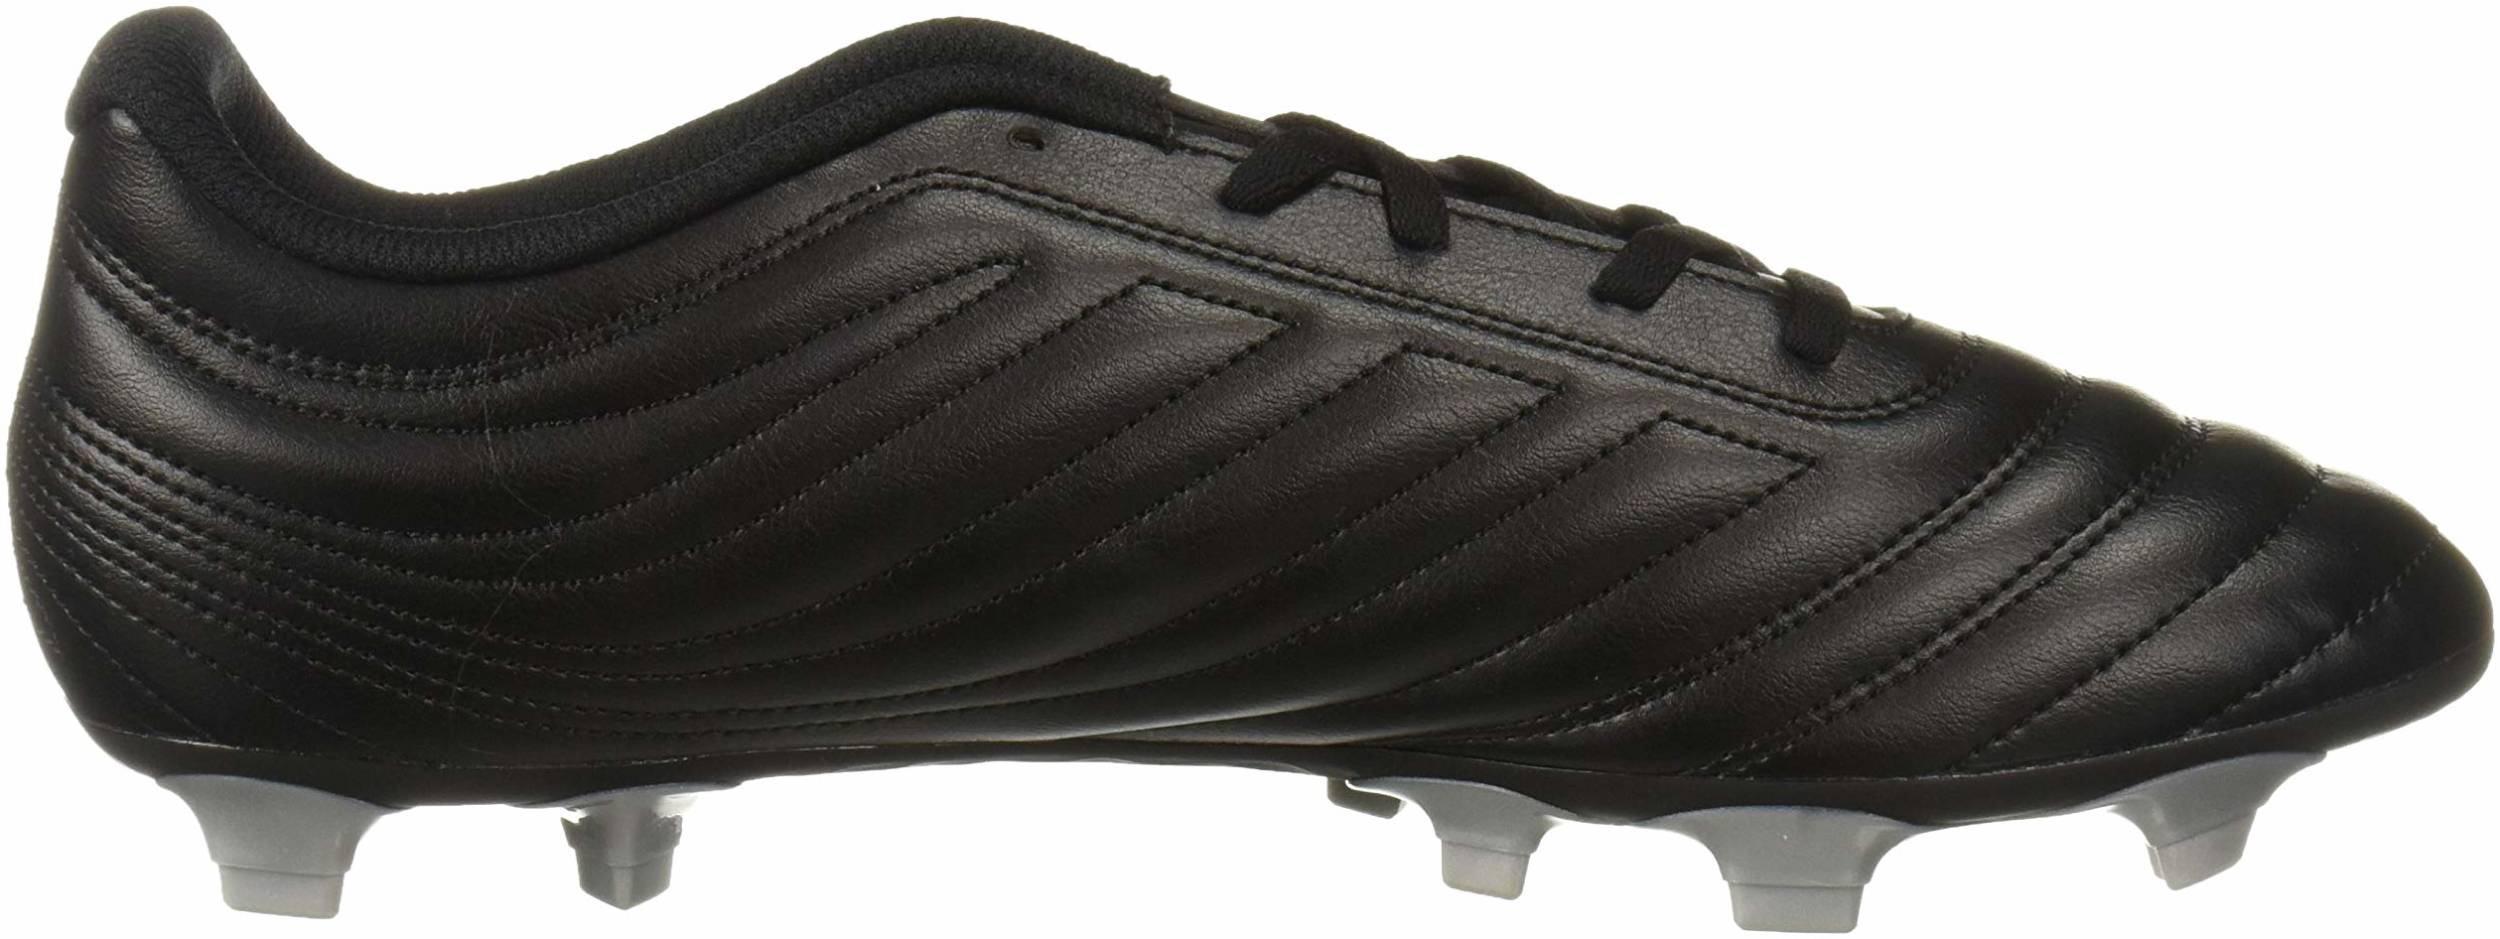 Review of Adidas Copa 19.4 Firm Ground 